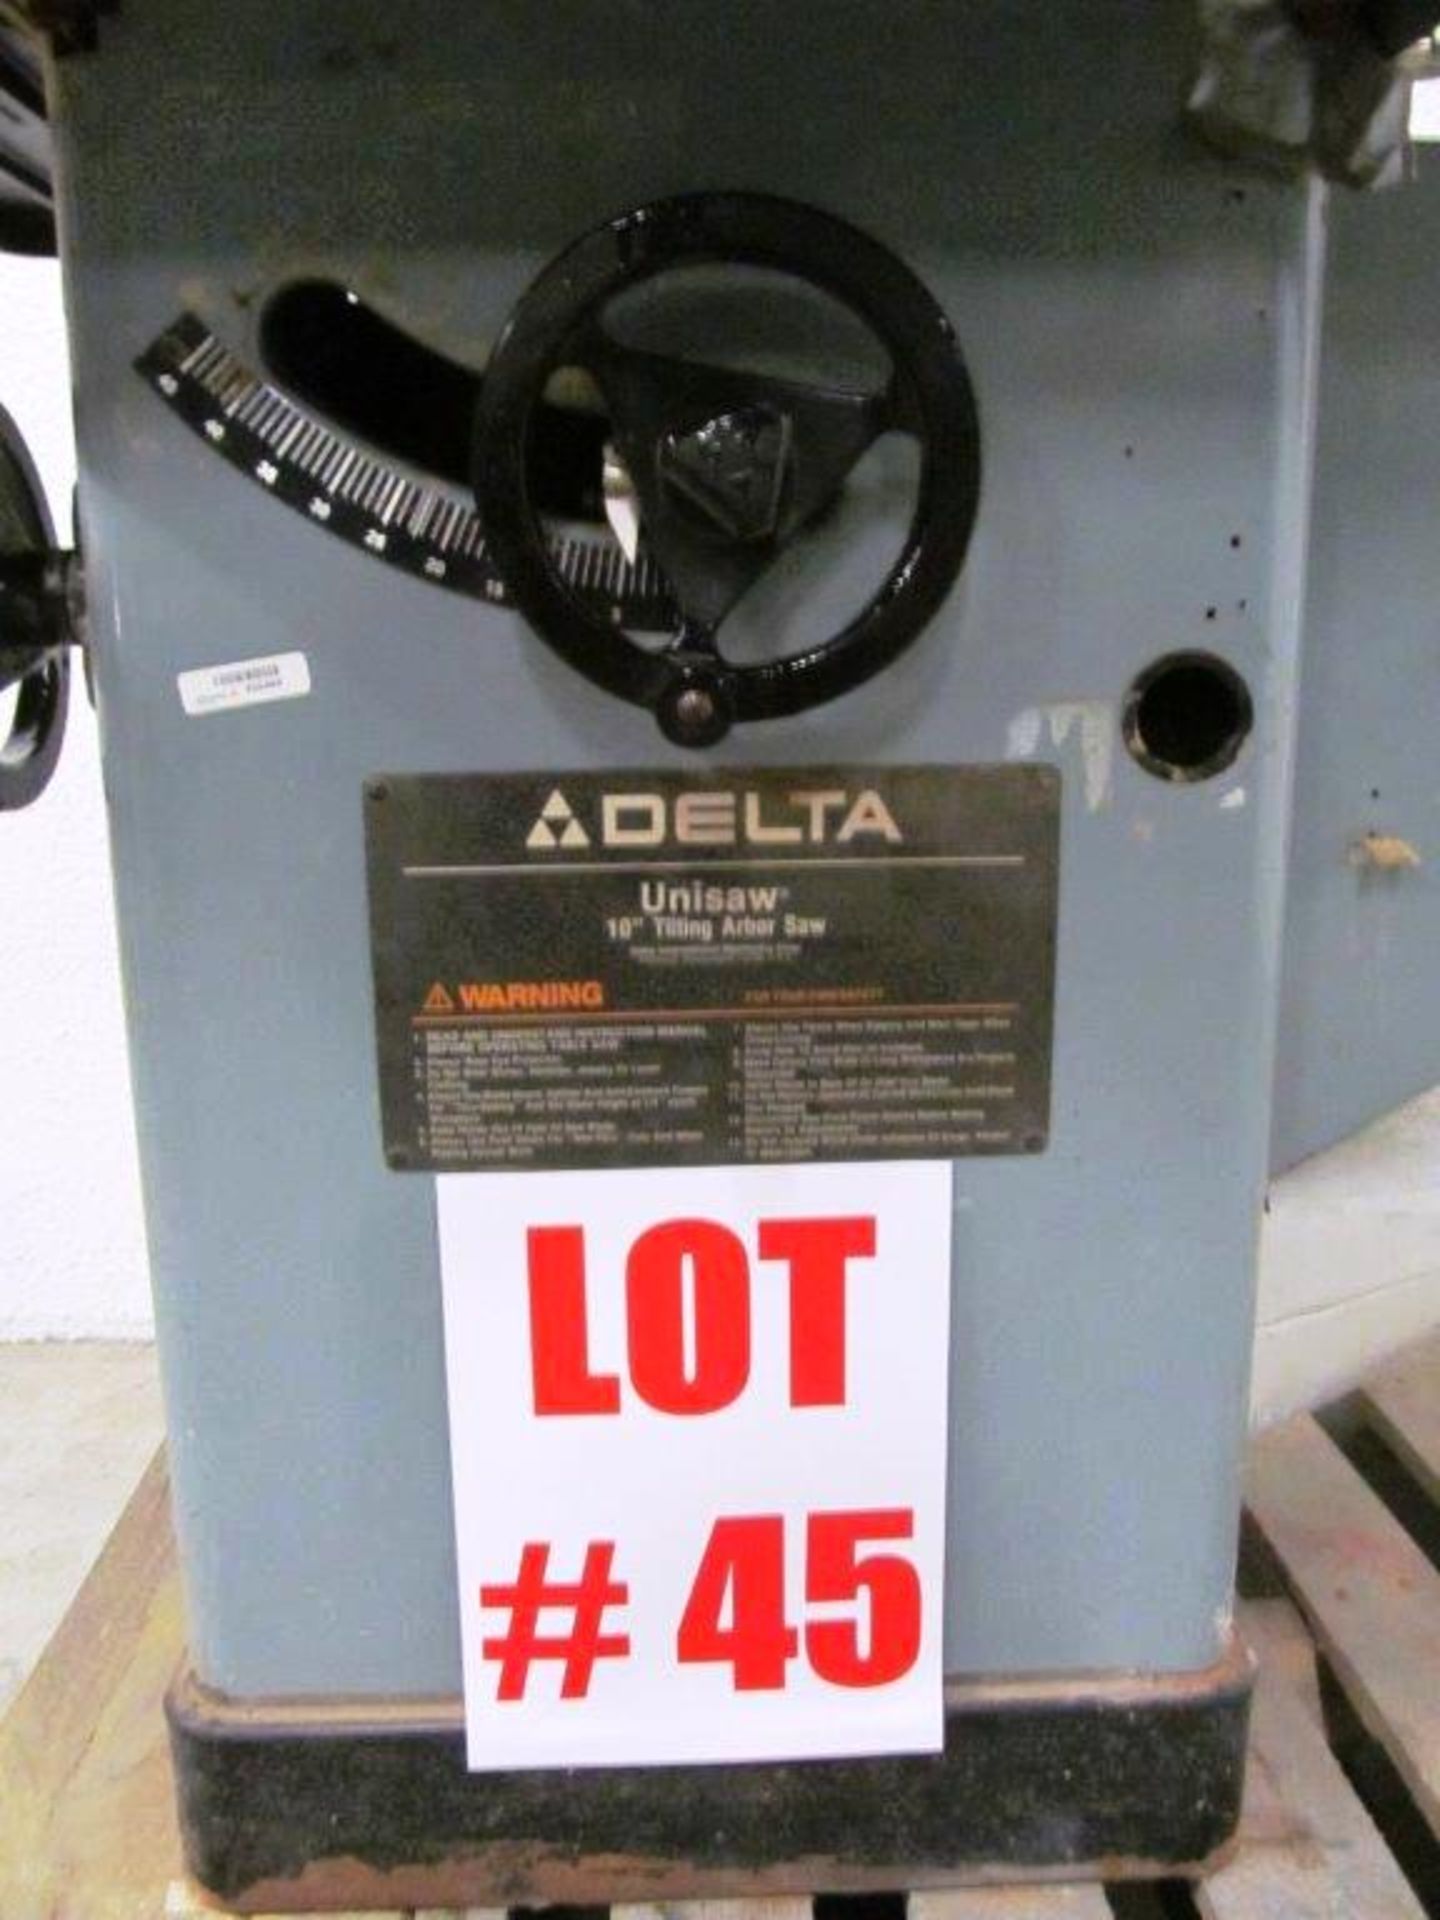 DELTA UNISAW 10'' TILTING ARBOR TABLE SAW, C/W UNIFENCE, SAW GUIDE MODEL: 34-462, S/N 90E33096, - Image 3 of 4